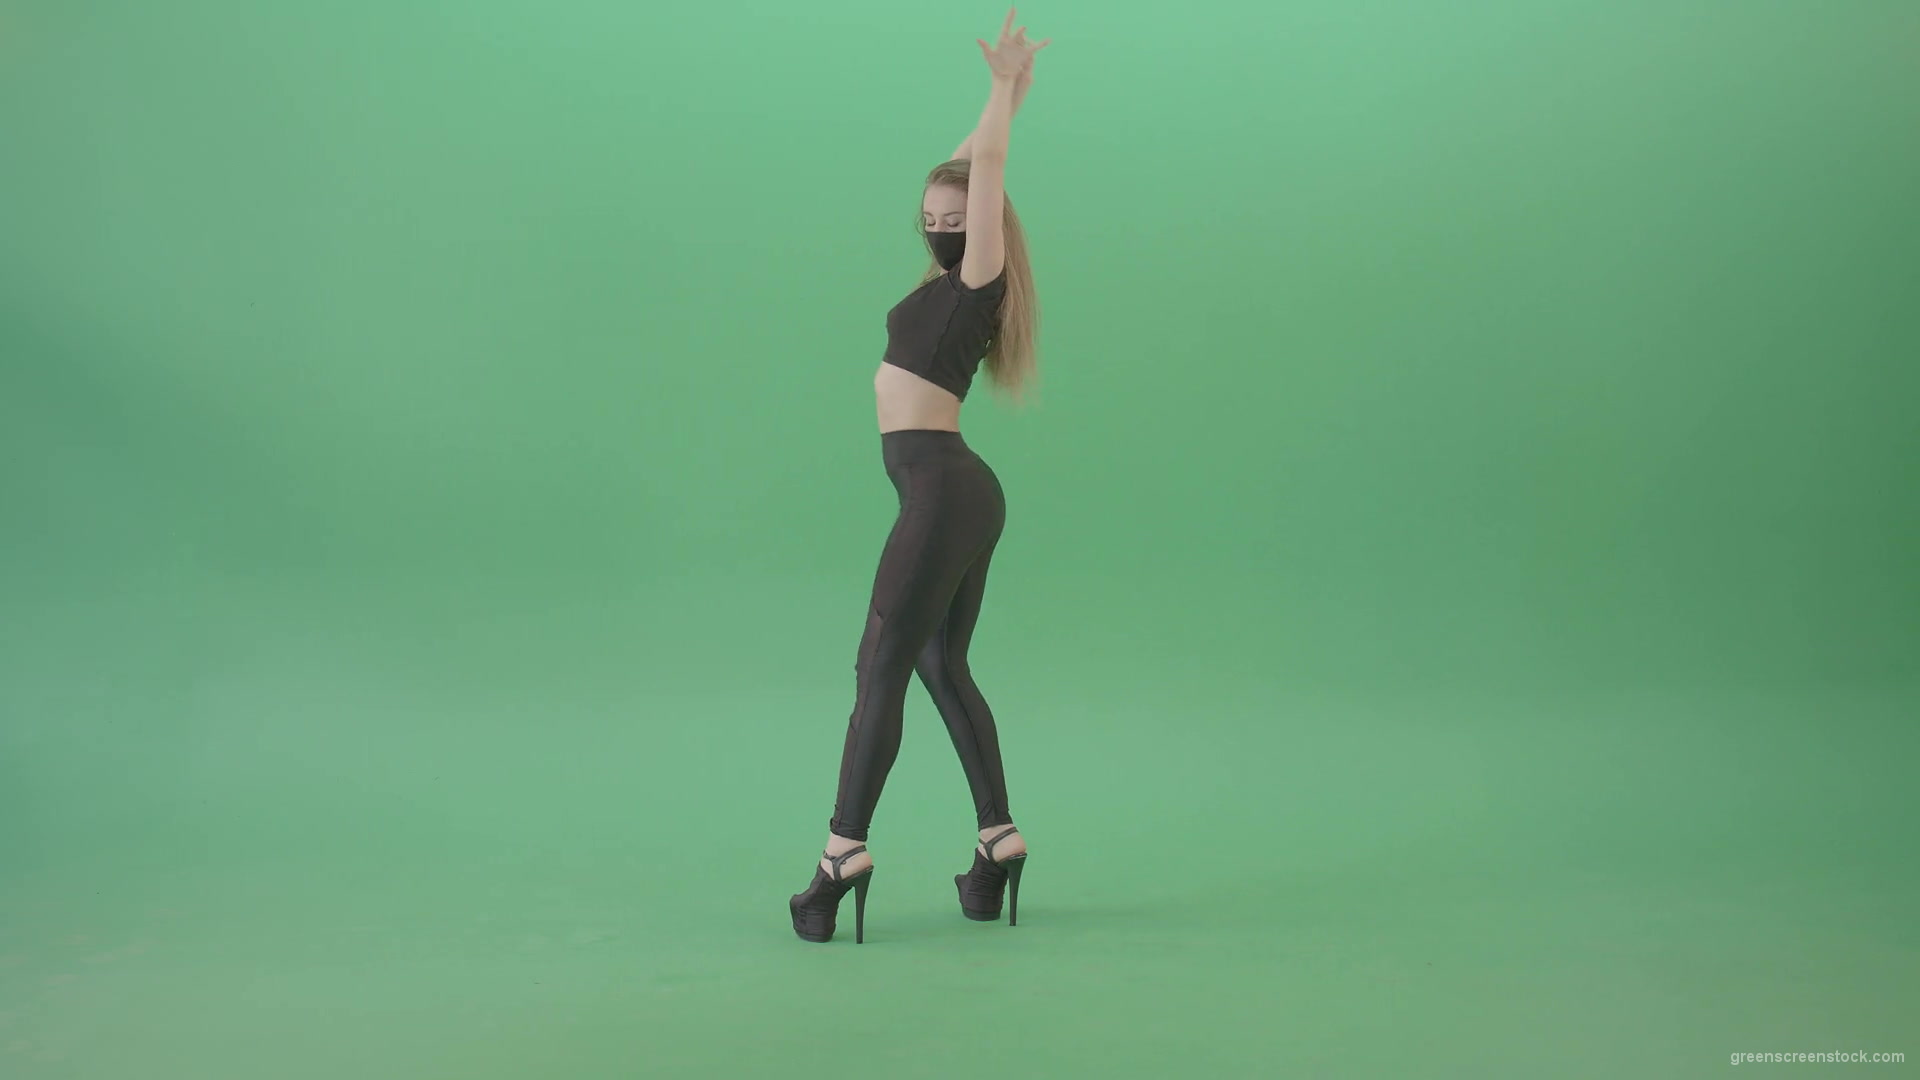 Exotic-sexy-dance-by-girl-in-black-latex-dress-isolated-on-green-screen-4K-Video-Footage-1920_006 Green Screen Stock